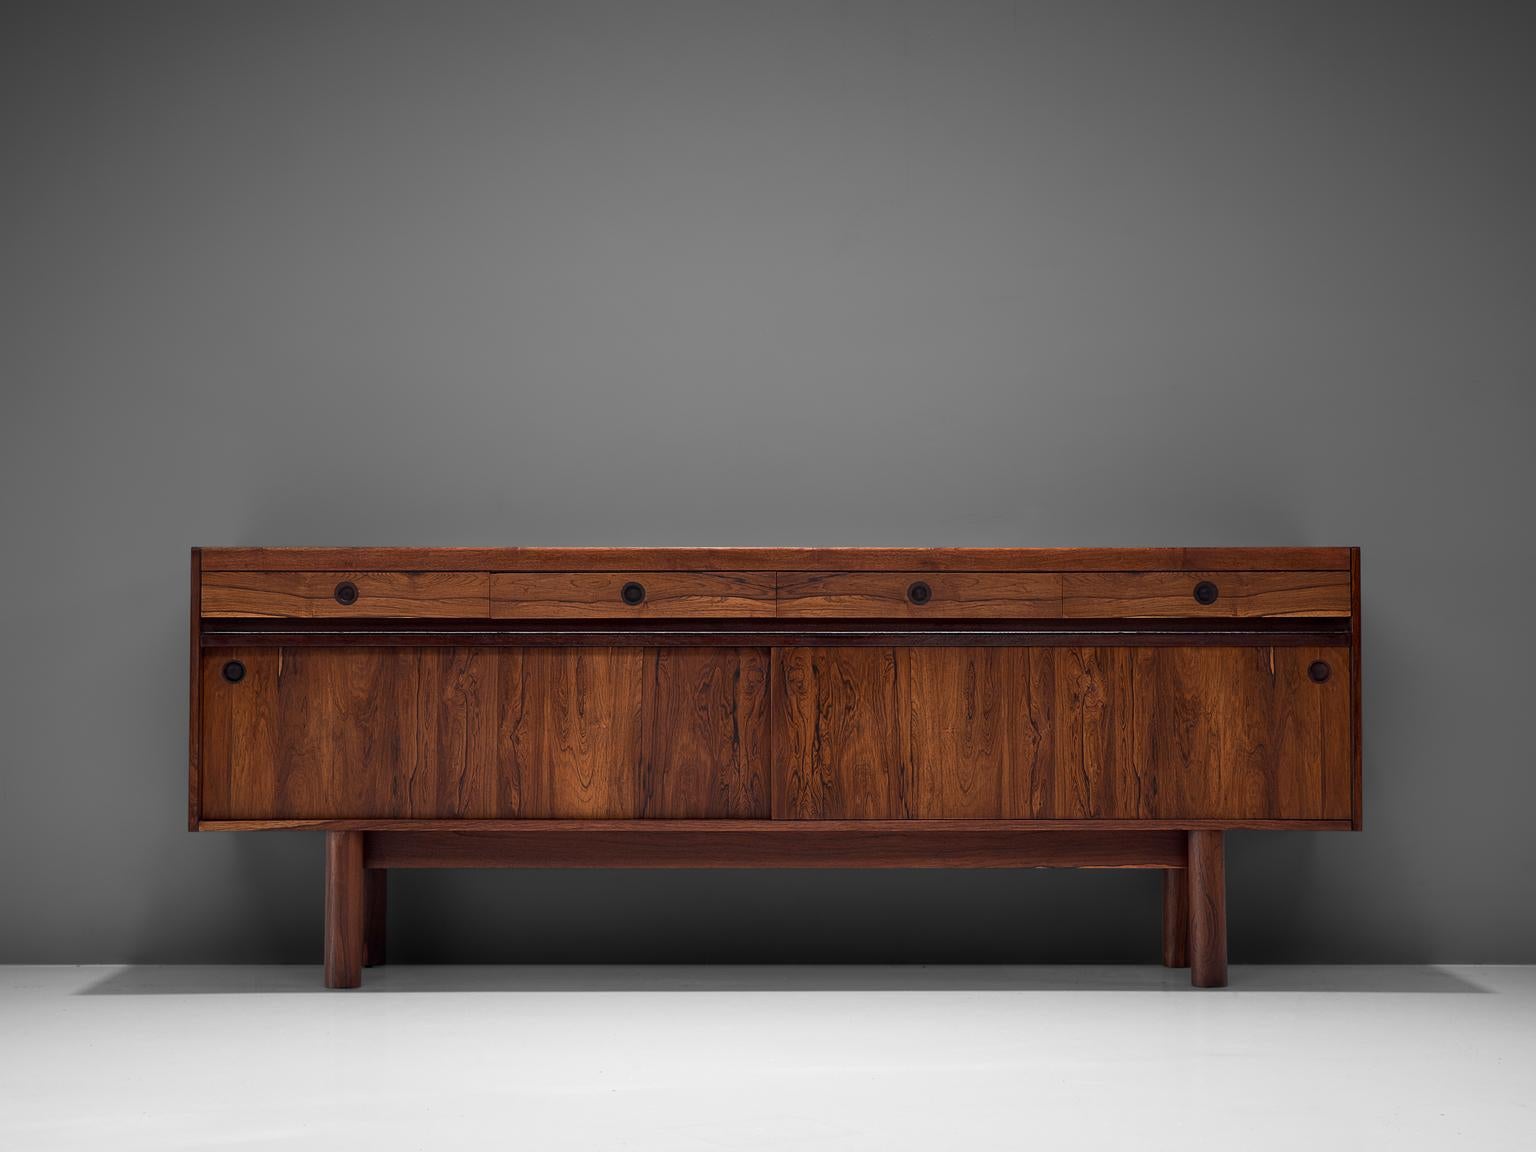 Sideboard, rosewood, Scandinavia, 1960s

This Scandinavian credenza is executed in rosewood. It consist of two sliding doors with characteristic black round inlayed handles, and four drawers. The design of this model is simplistic, with attention